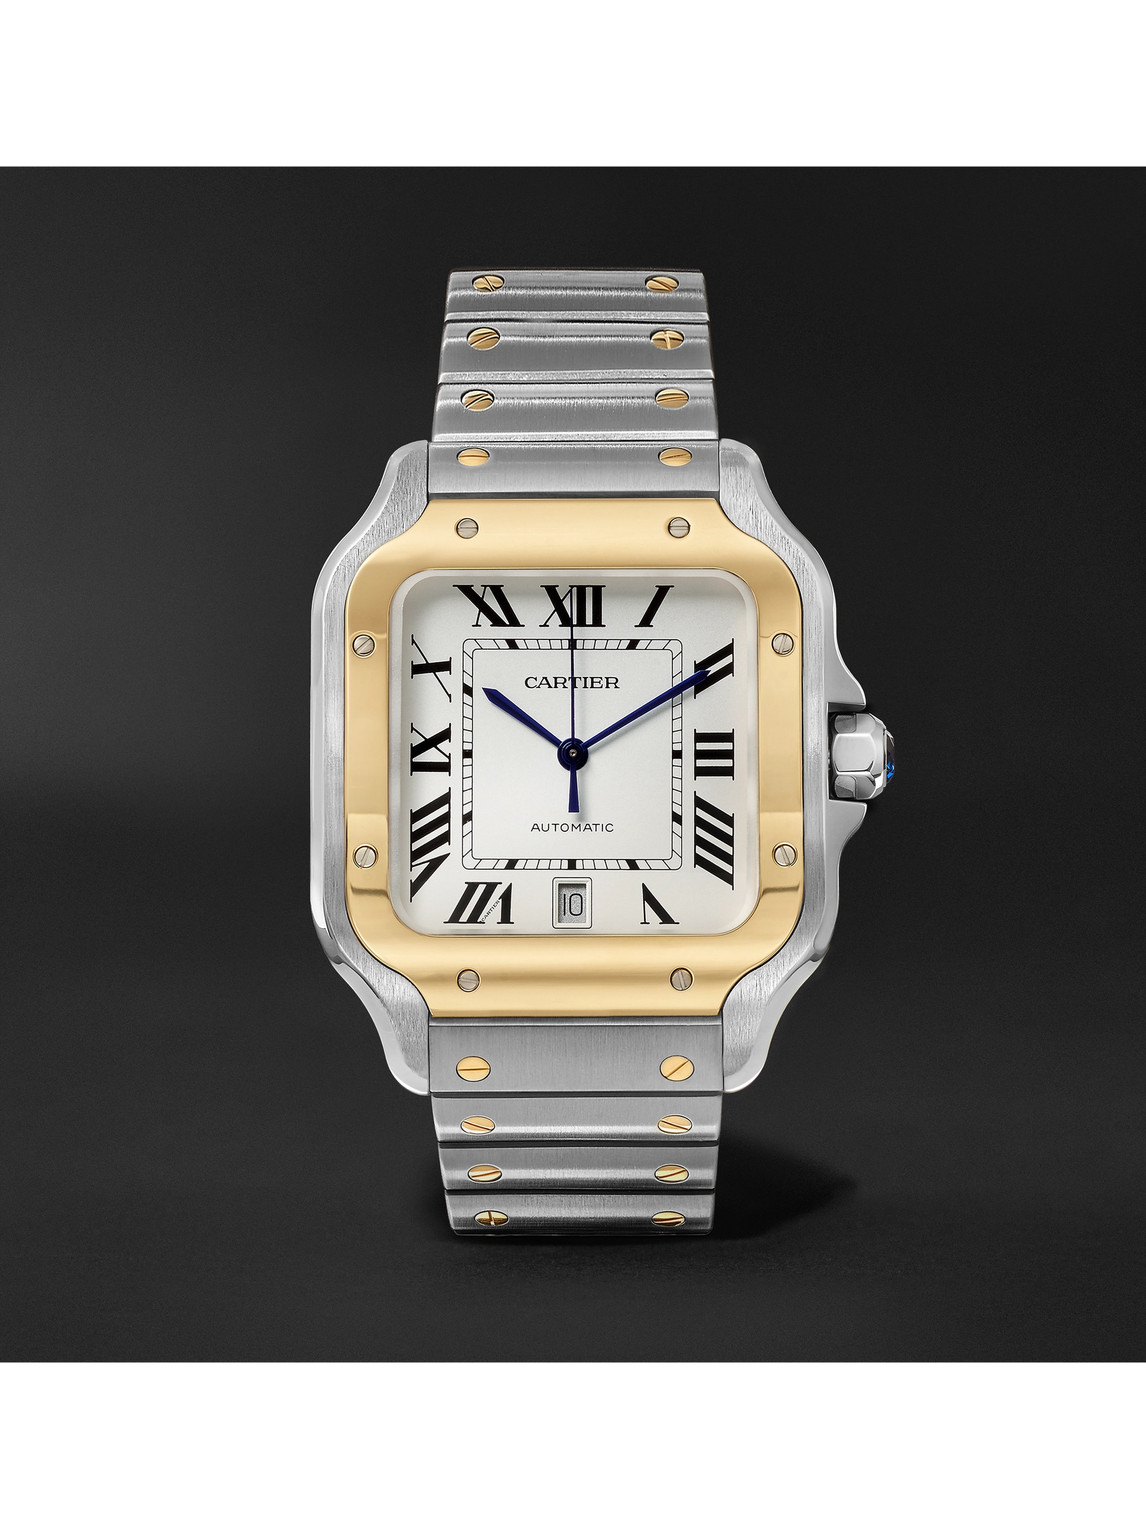 Cartier Santos Automatic 39.8mm 18-karat Gold Interchangeable Stainless Steel And Leather Watch, Ref. No. W2 In White